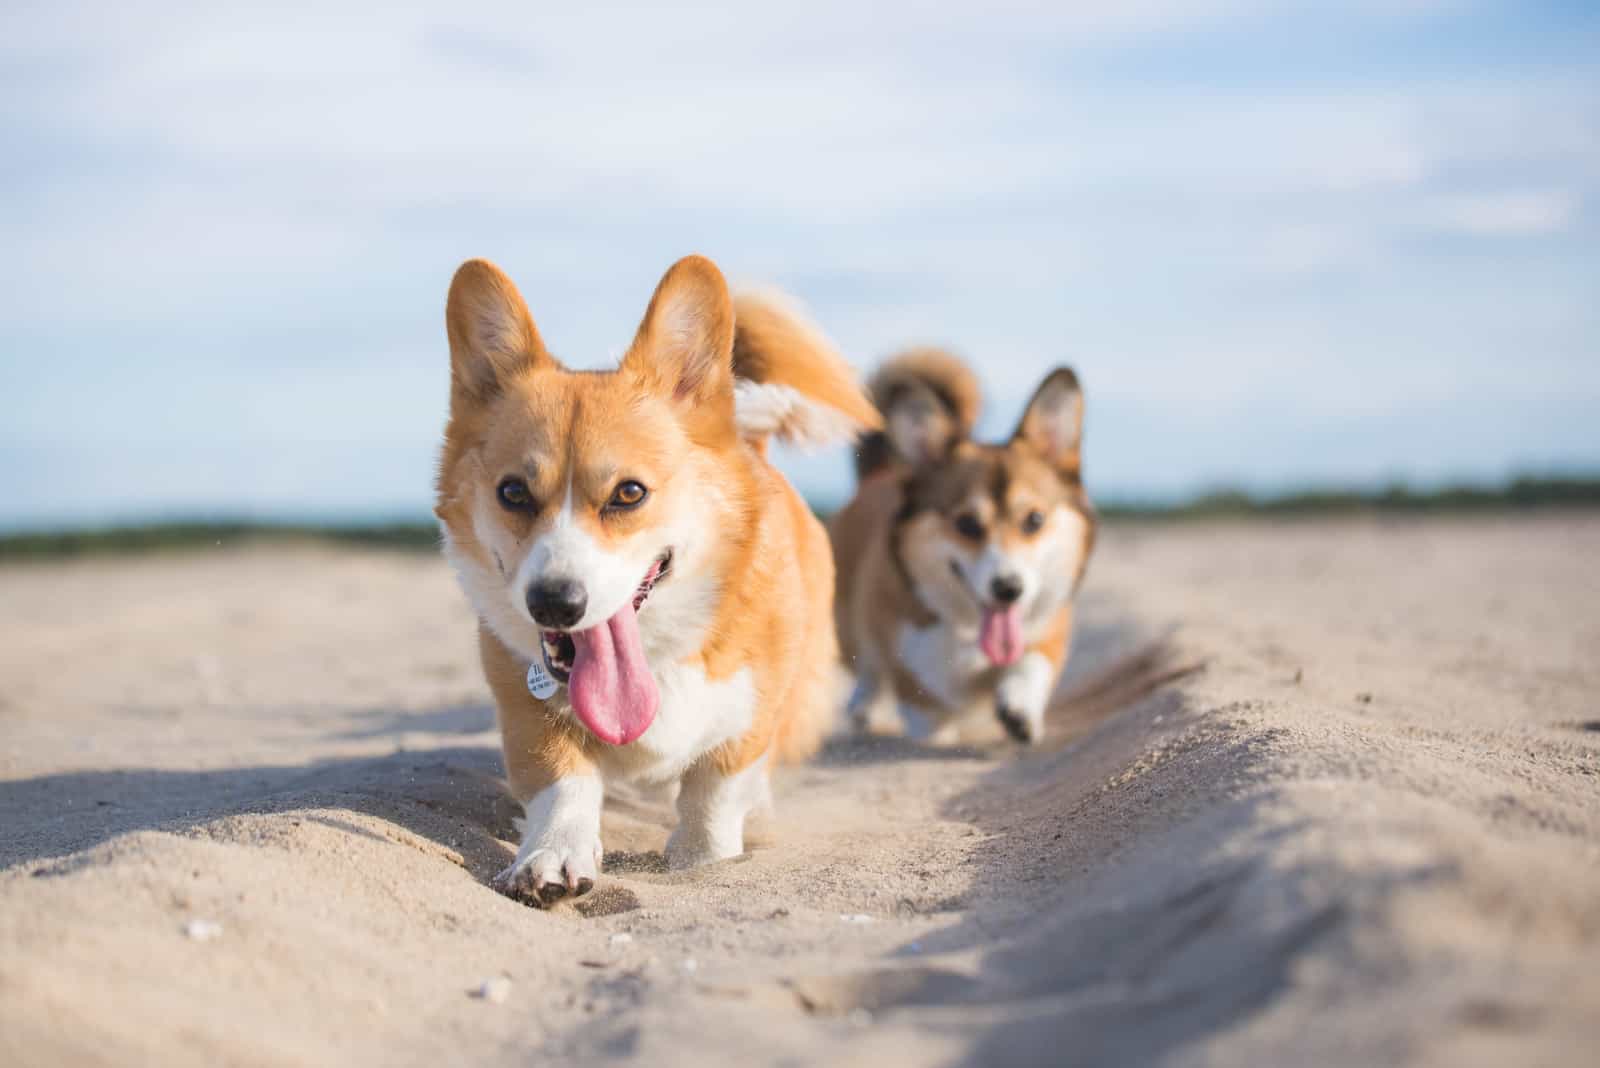 Two corgi dogs walking on a sand with their tongues out